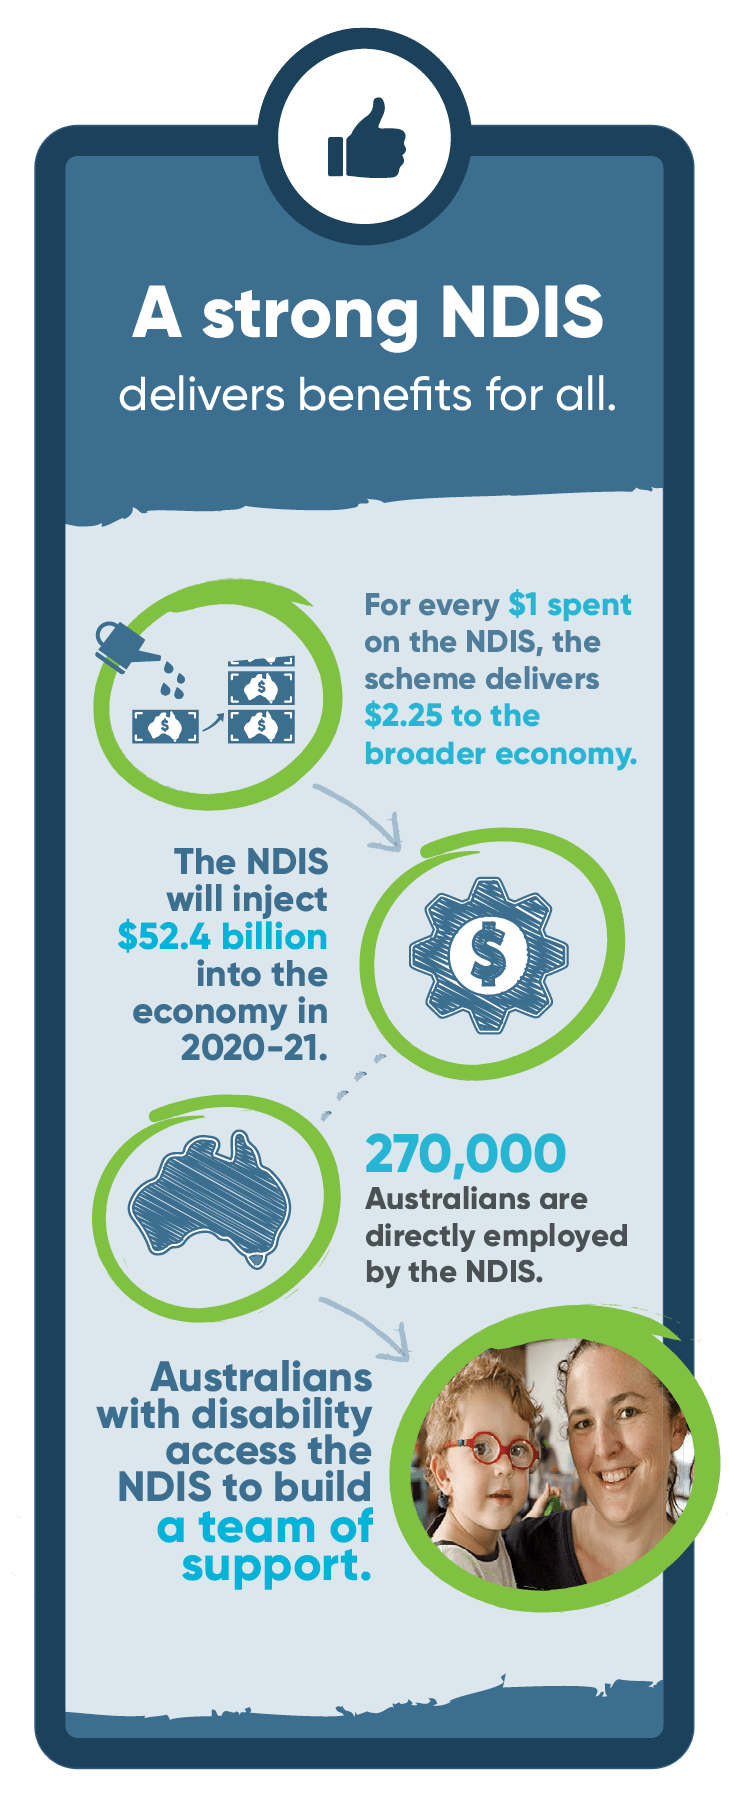 A strong NDIS delivers benefits for all. For everyo $1 spent on the NDIS the scheme delivers $2.25 to the broader economy. The NDIS will inject 52.4 billion into the economy in 2021 to 2021. 270,000 Australians are directly employed by the NDIS. Australians with disability access the NDIS to build a team of support.